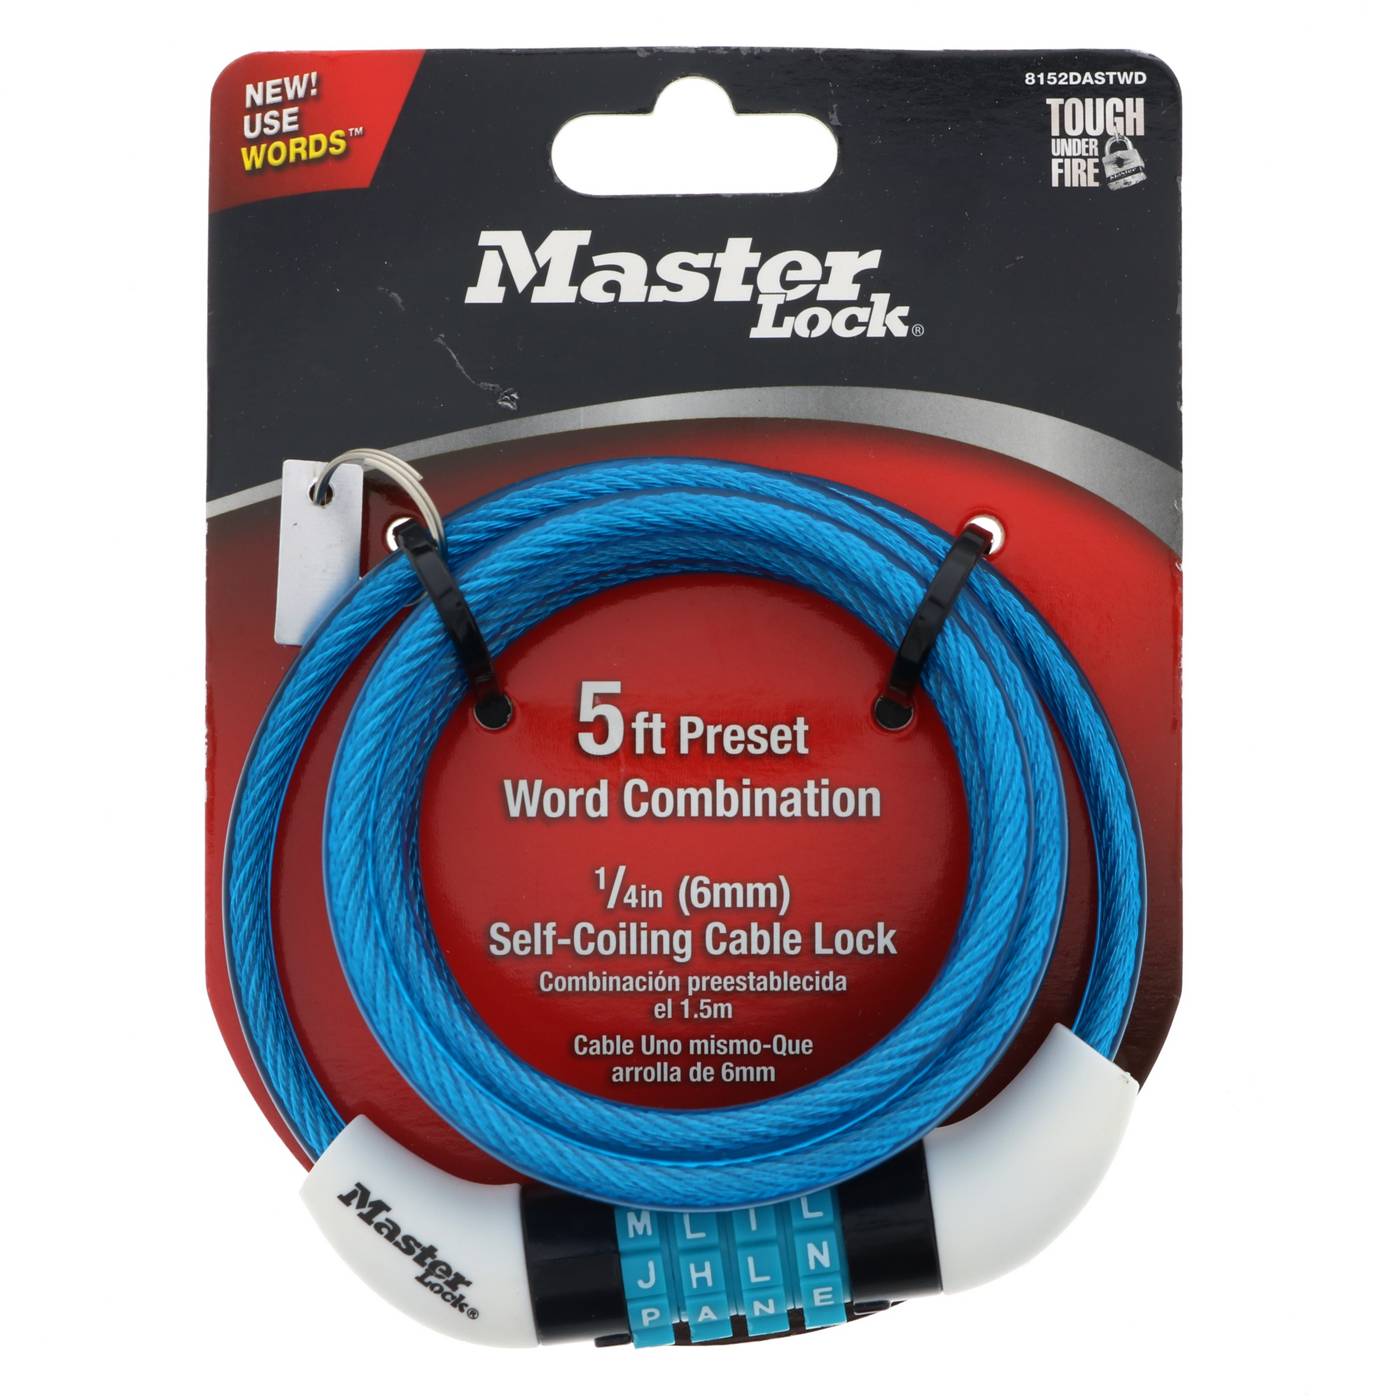 Master Lock Combination Cable Lock, Colors May Vary; image 4 of 4